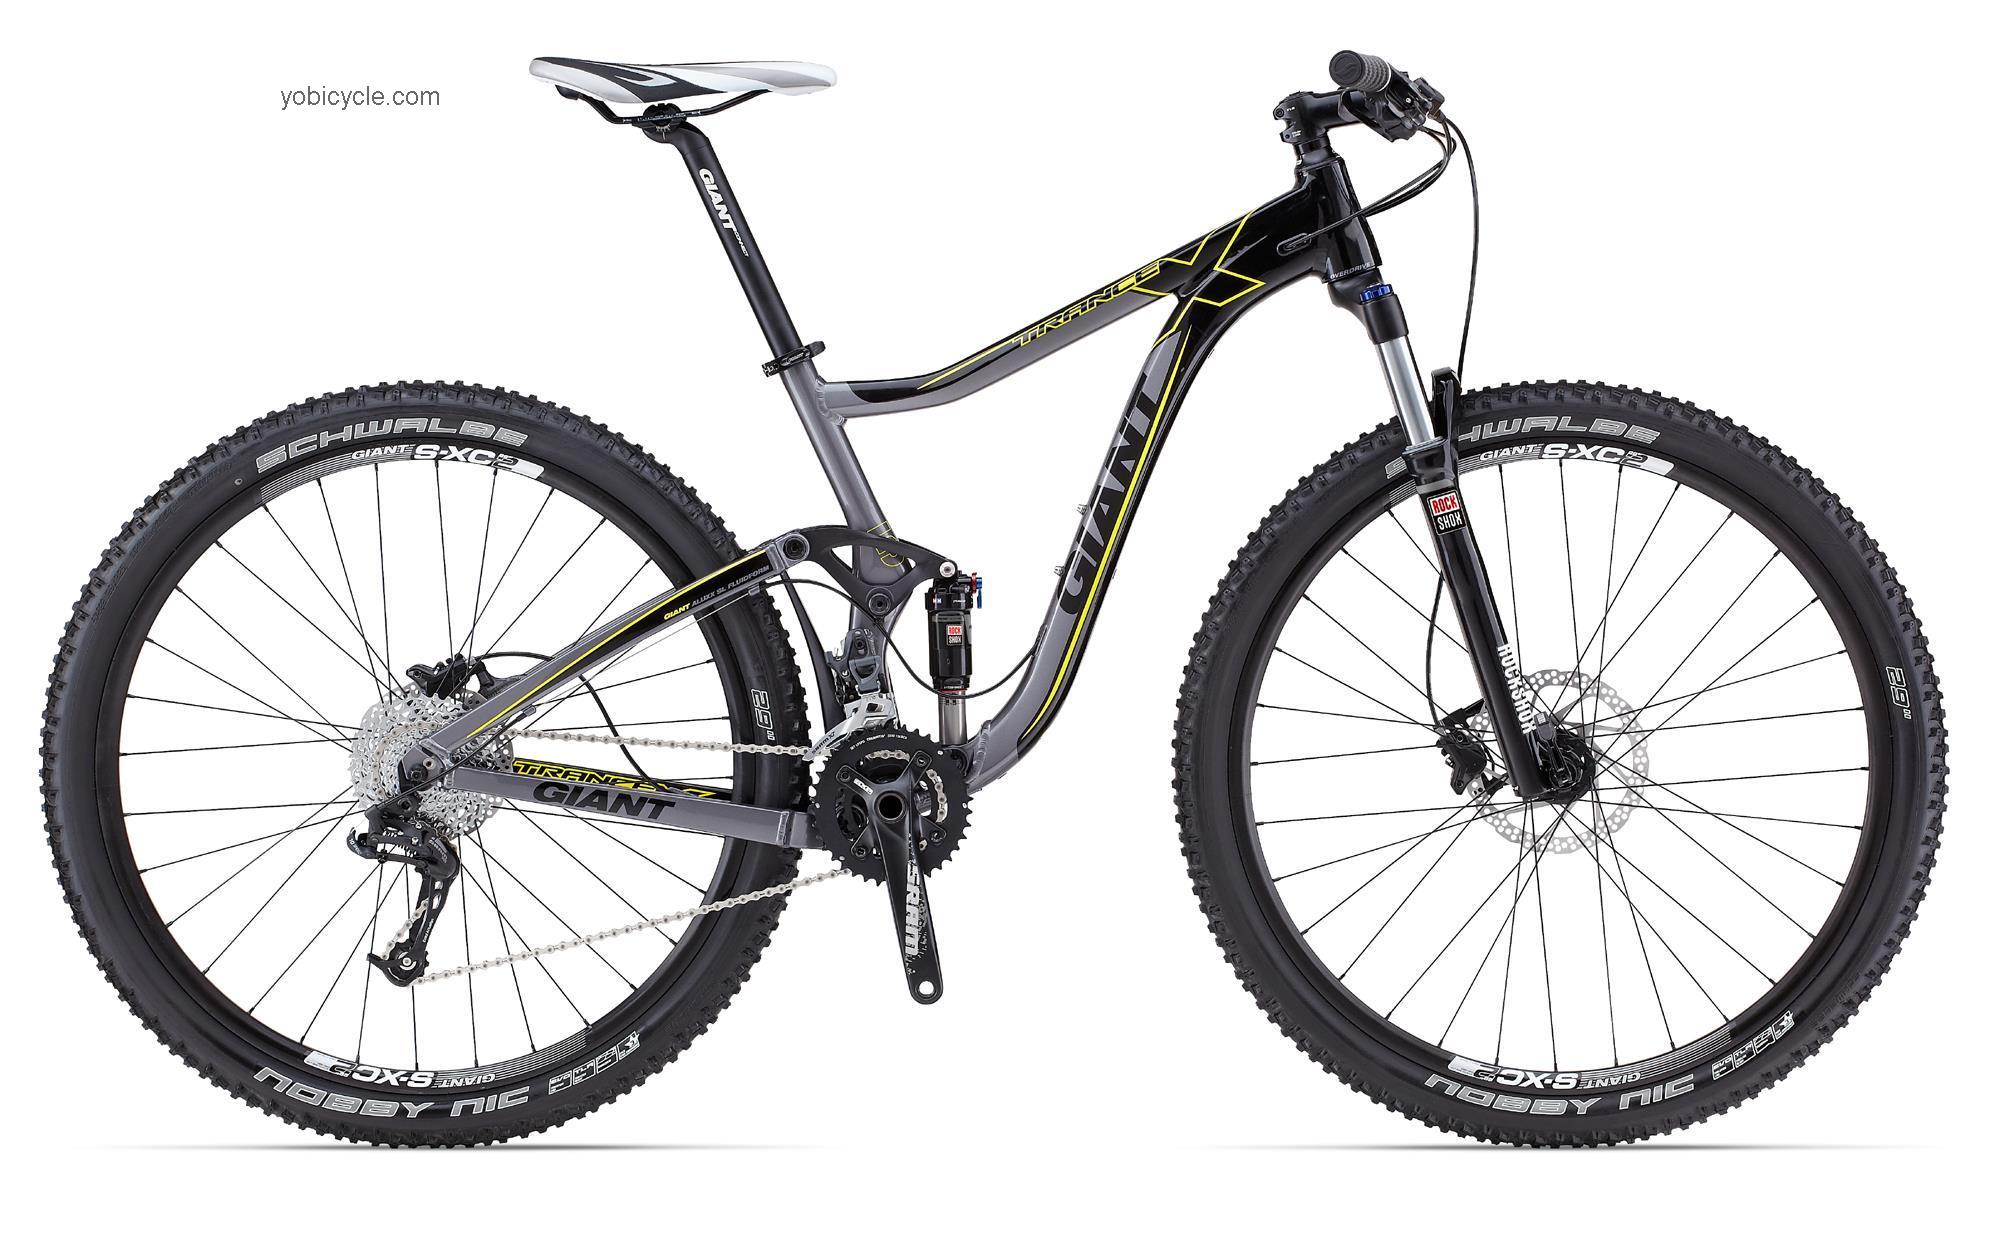 Giant Trance X 29er 2 2013 comparison online with competitors